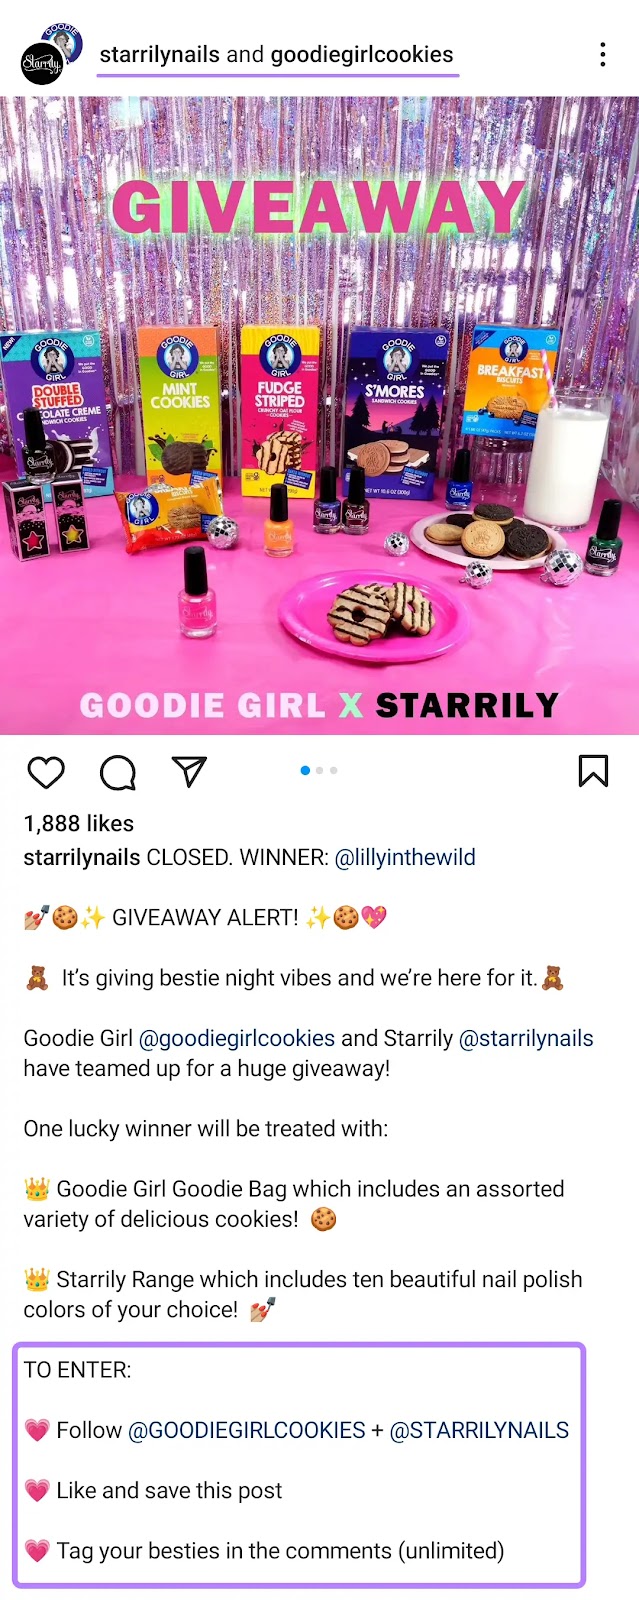 An example of Instagram giveaway by Goodie **** and Starrily, in which participants have to follow both accounts in order to participate